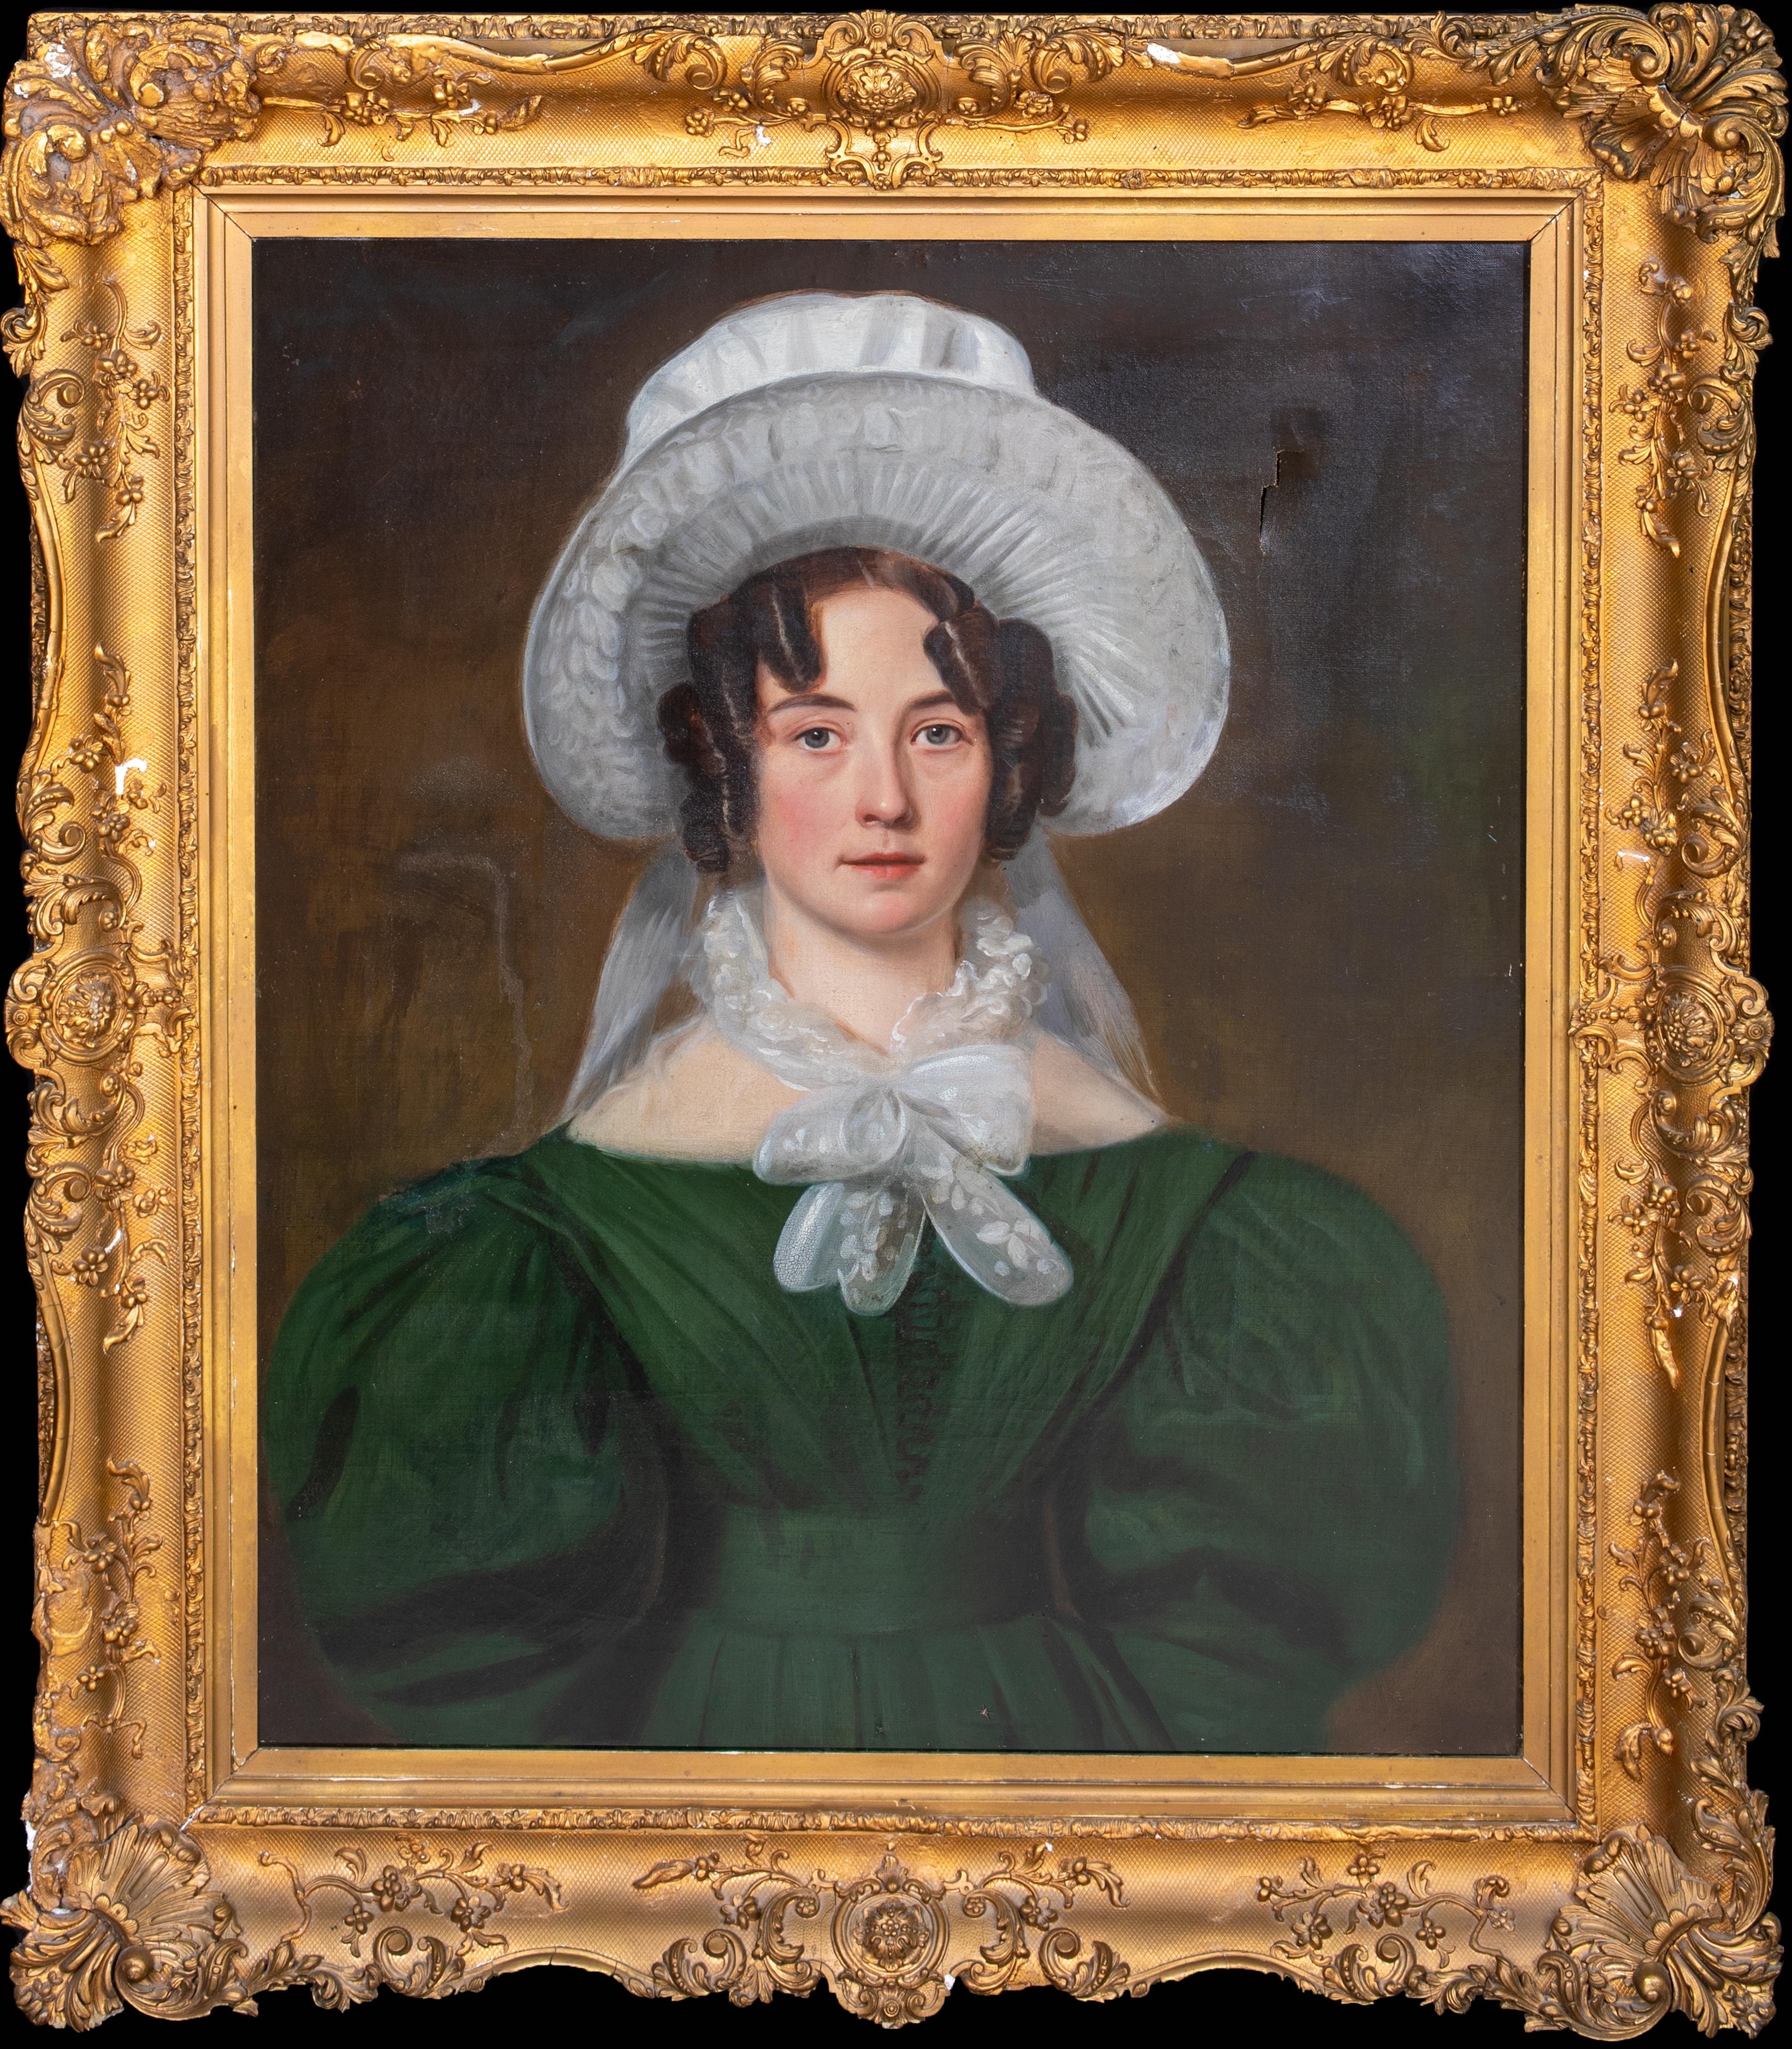 Unknown Portrait Painting - Portrait Of Matilda Currie, aged 28, Wearing an elaborate Bonnet, 19th Century  